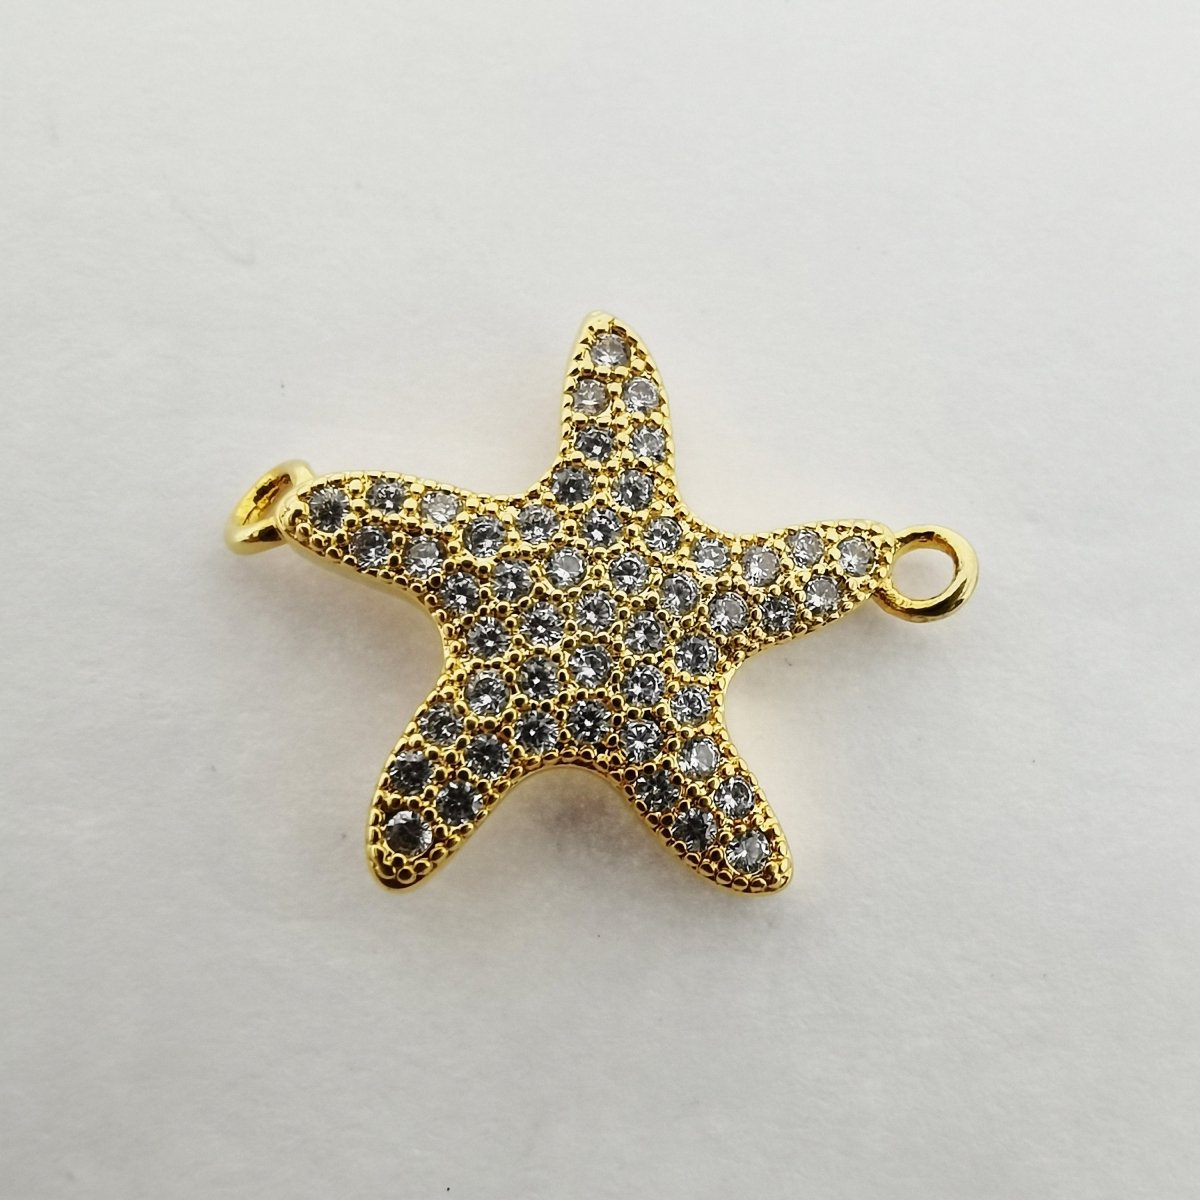 Gold Dancing Star Fish, Celestial, Starry Night Sky, Cubic Zirconia Bracelet Charm, Necklace Pendant, Findings for Jewelry Making, F-138 - DLUXCA